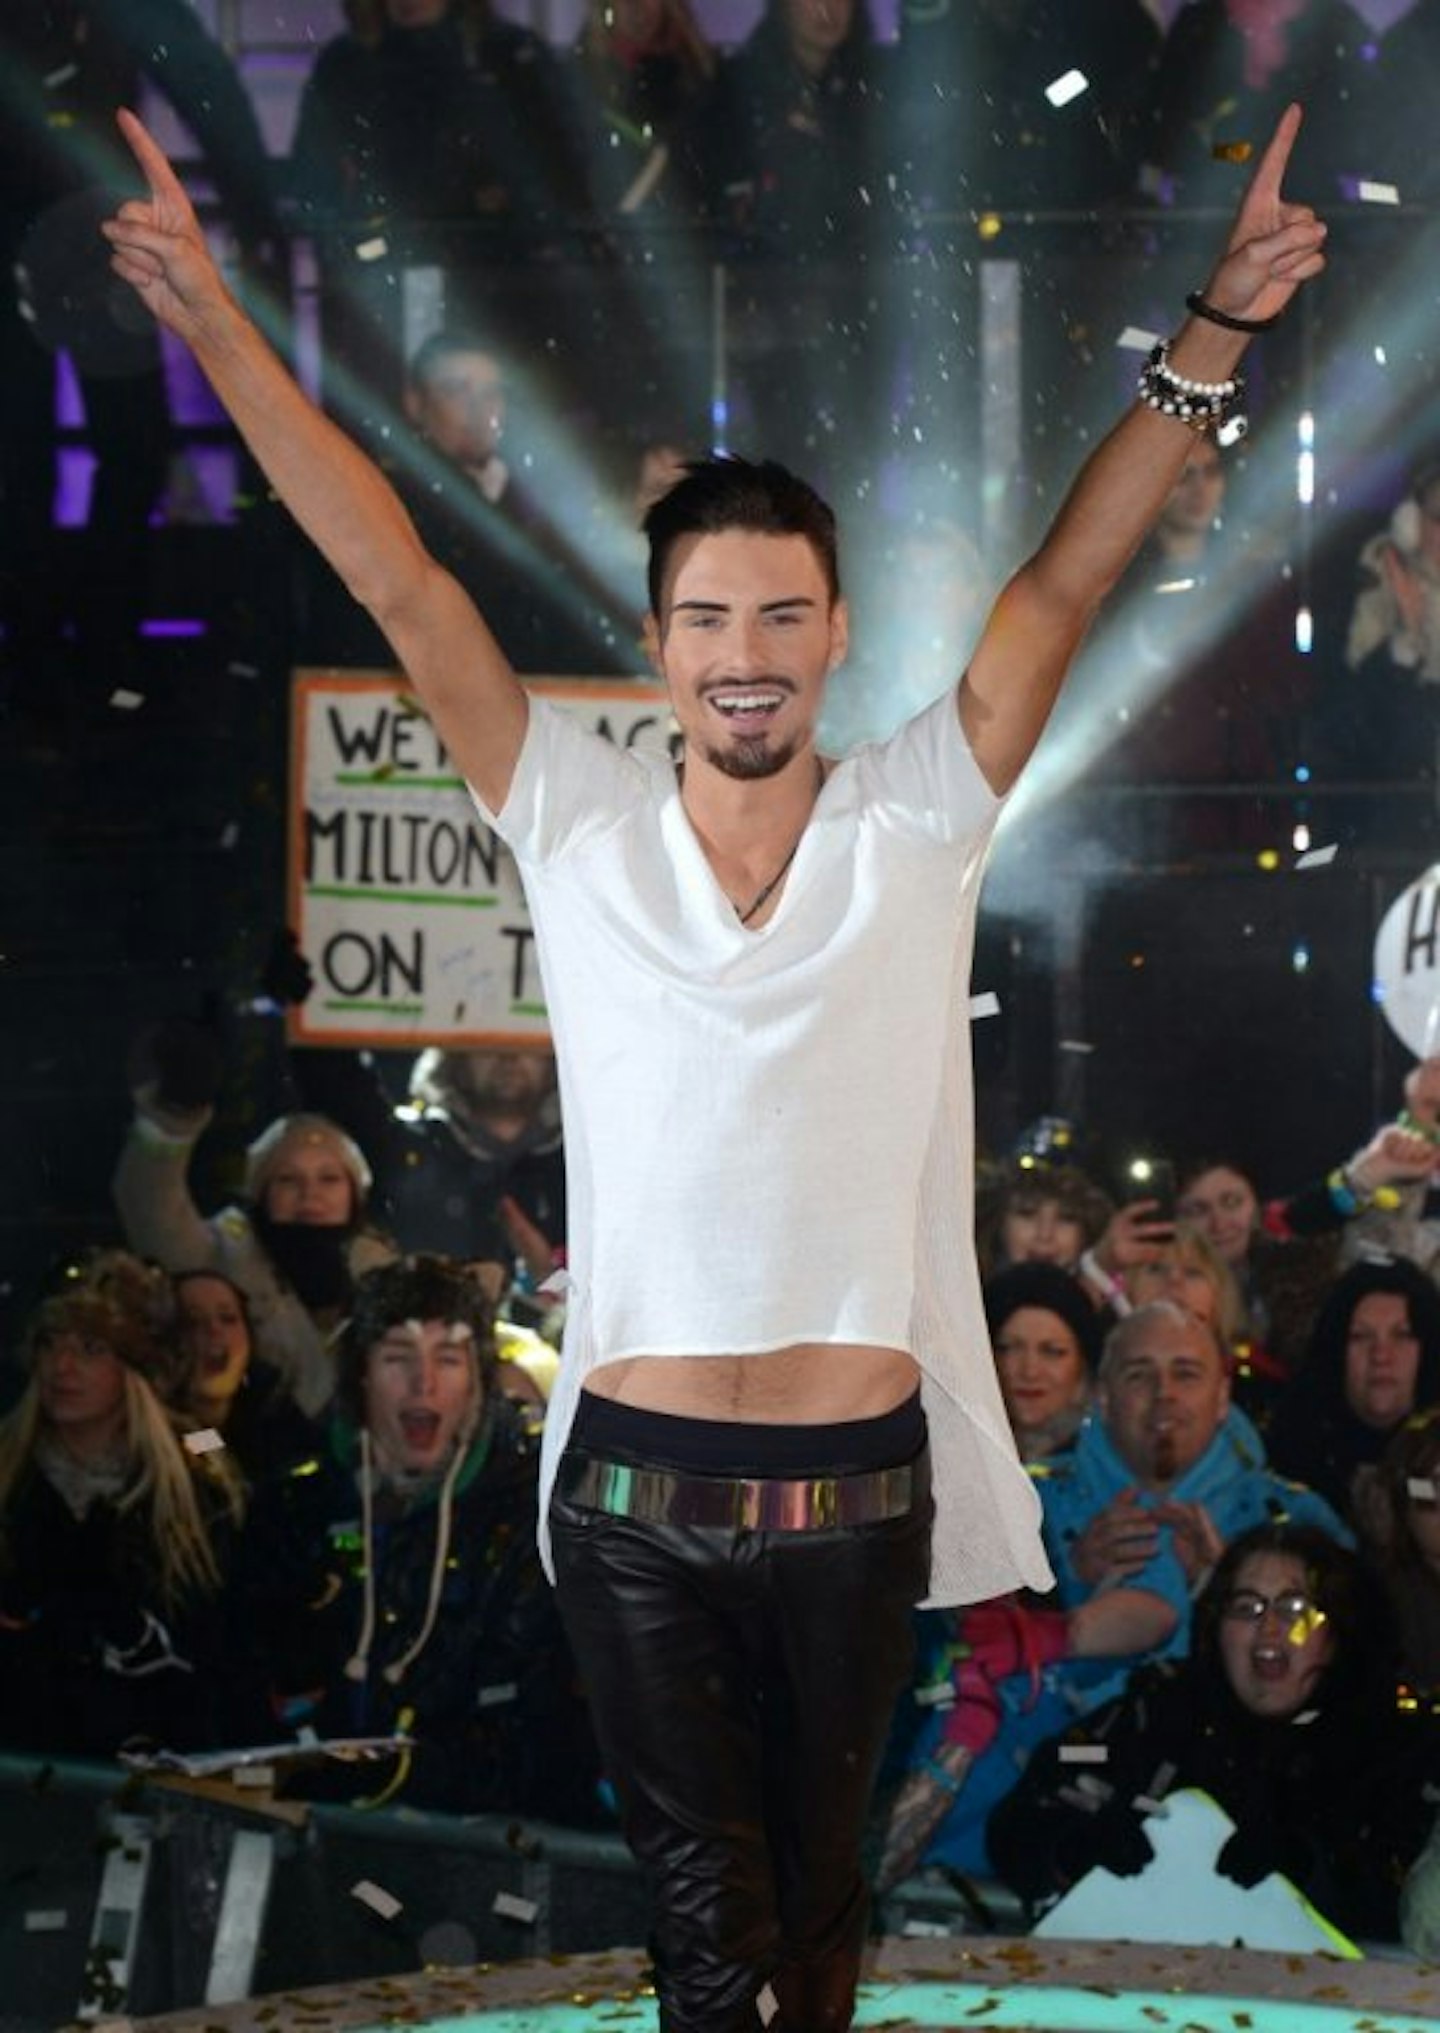 Rylan holding arms up with a white t-shirt and black skinny jeans